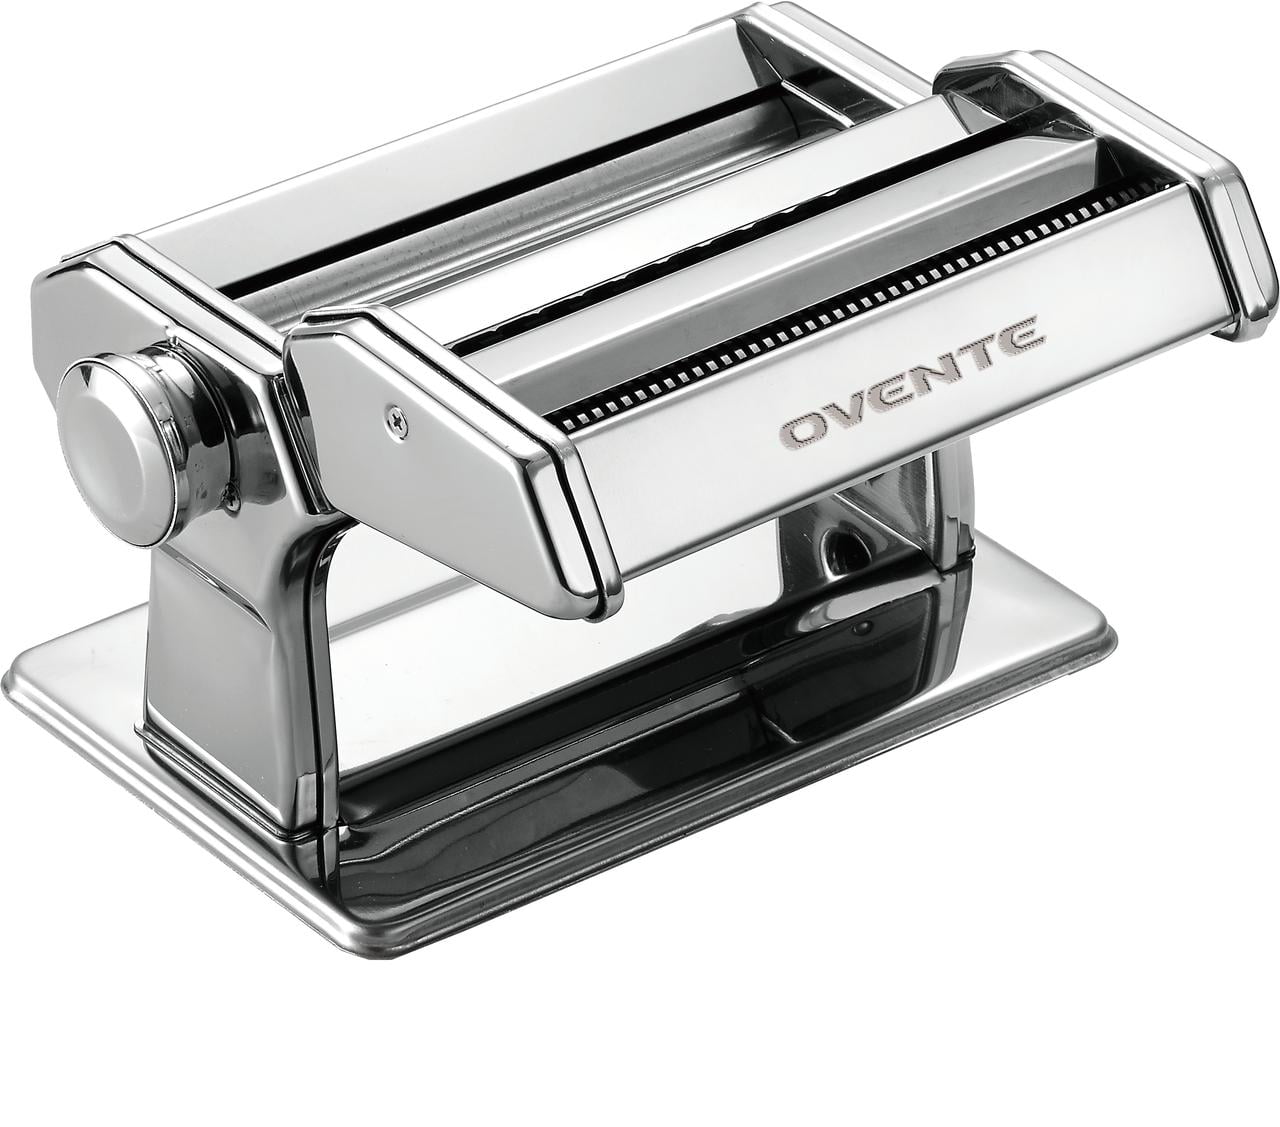 OVENTE Manual Stainless Steel Pasta Maker Machine and 7 Thickness Setting  (0.5 to 3 mm), Easy Cleaning & Storage with Attachments of Hand Crank  Roller Noodle Cutter & Countertop Clamp, Silver PA515S 